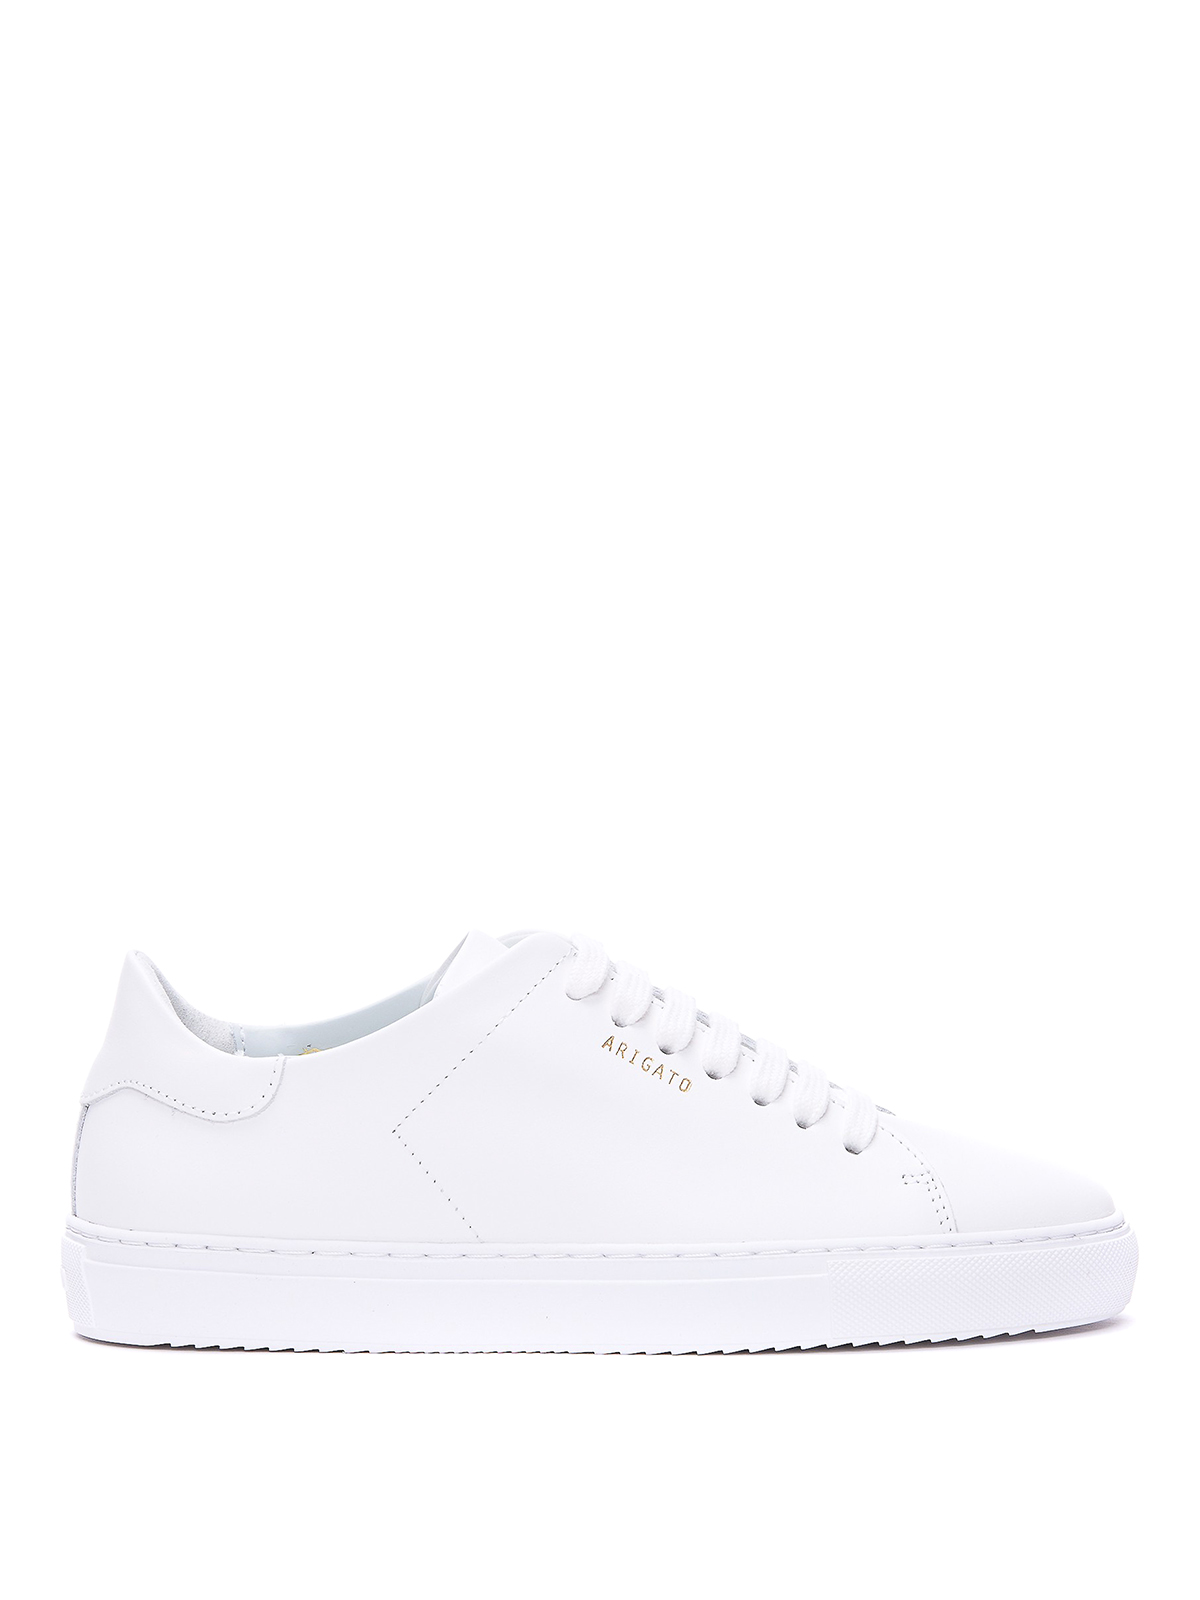 Axel Arigato Clean 90 Leather Trainer In White